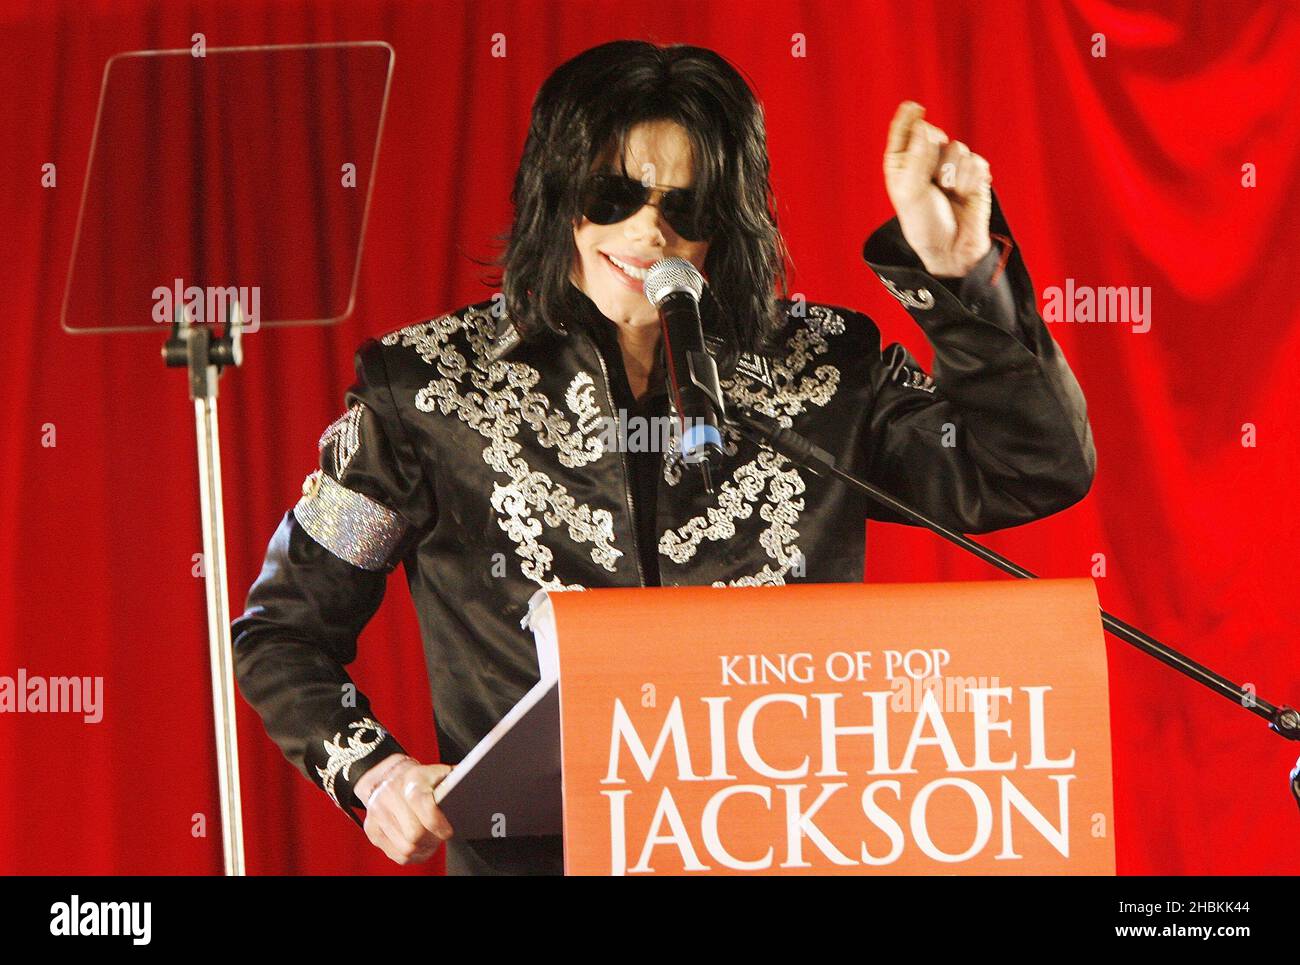 Michael Jackson announces plans for his last performances in London in July at the O2 Arena during a press conference held at the O2 Arena in Greenwich, London. Stock Photo